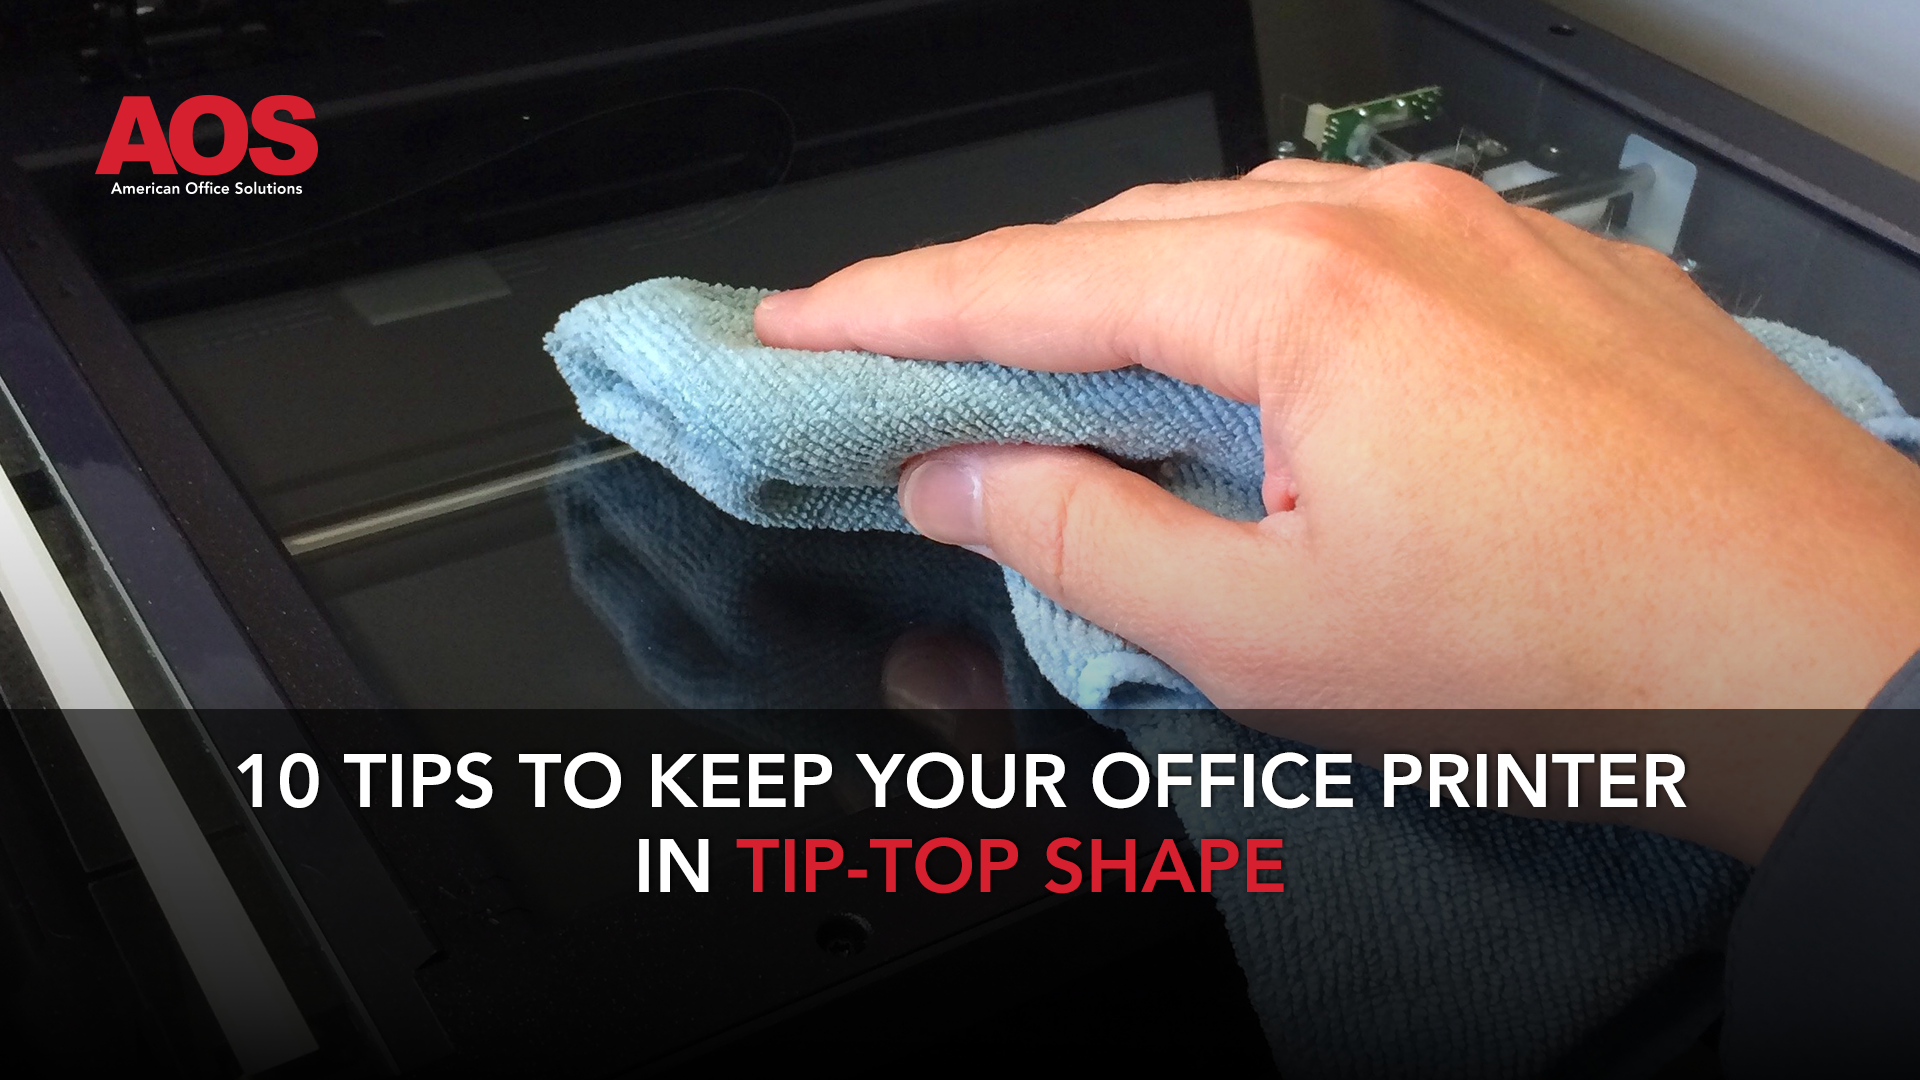 10 Tips to Keep Your Office Printer in Tip-Top Shape